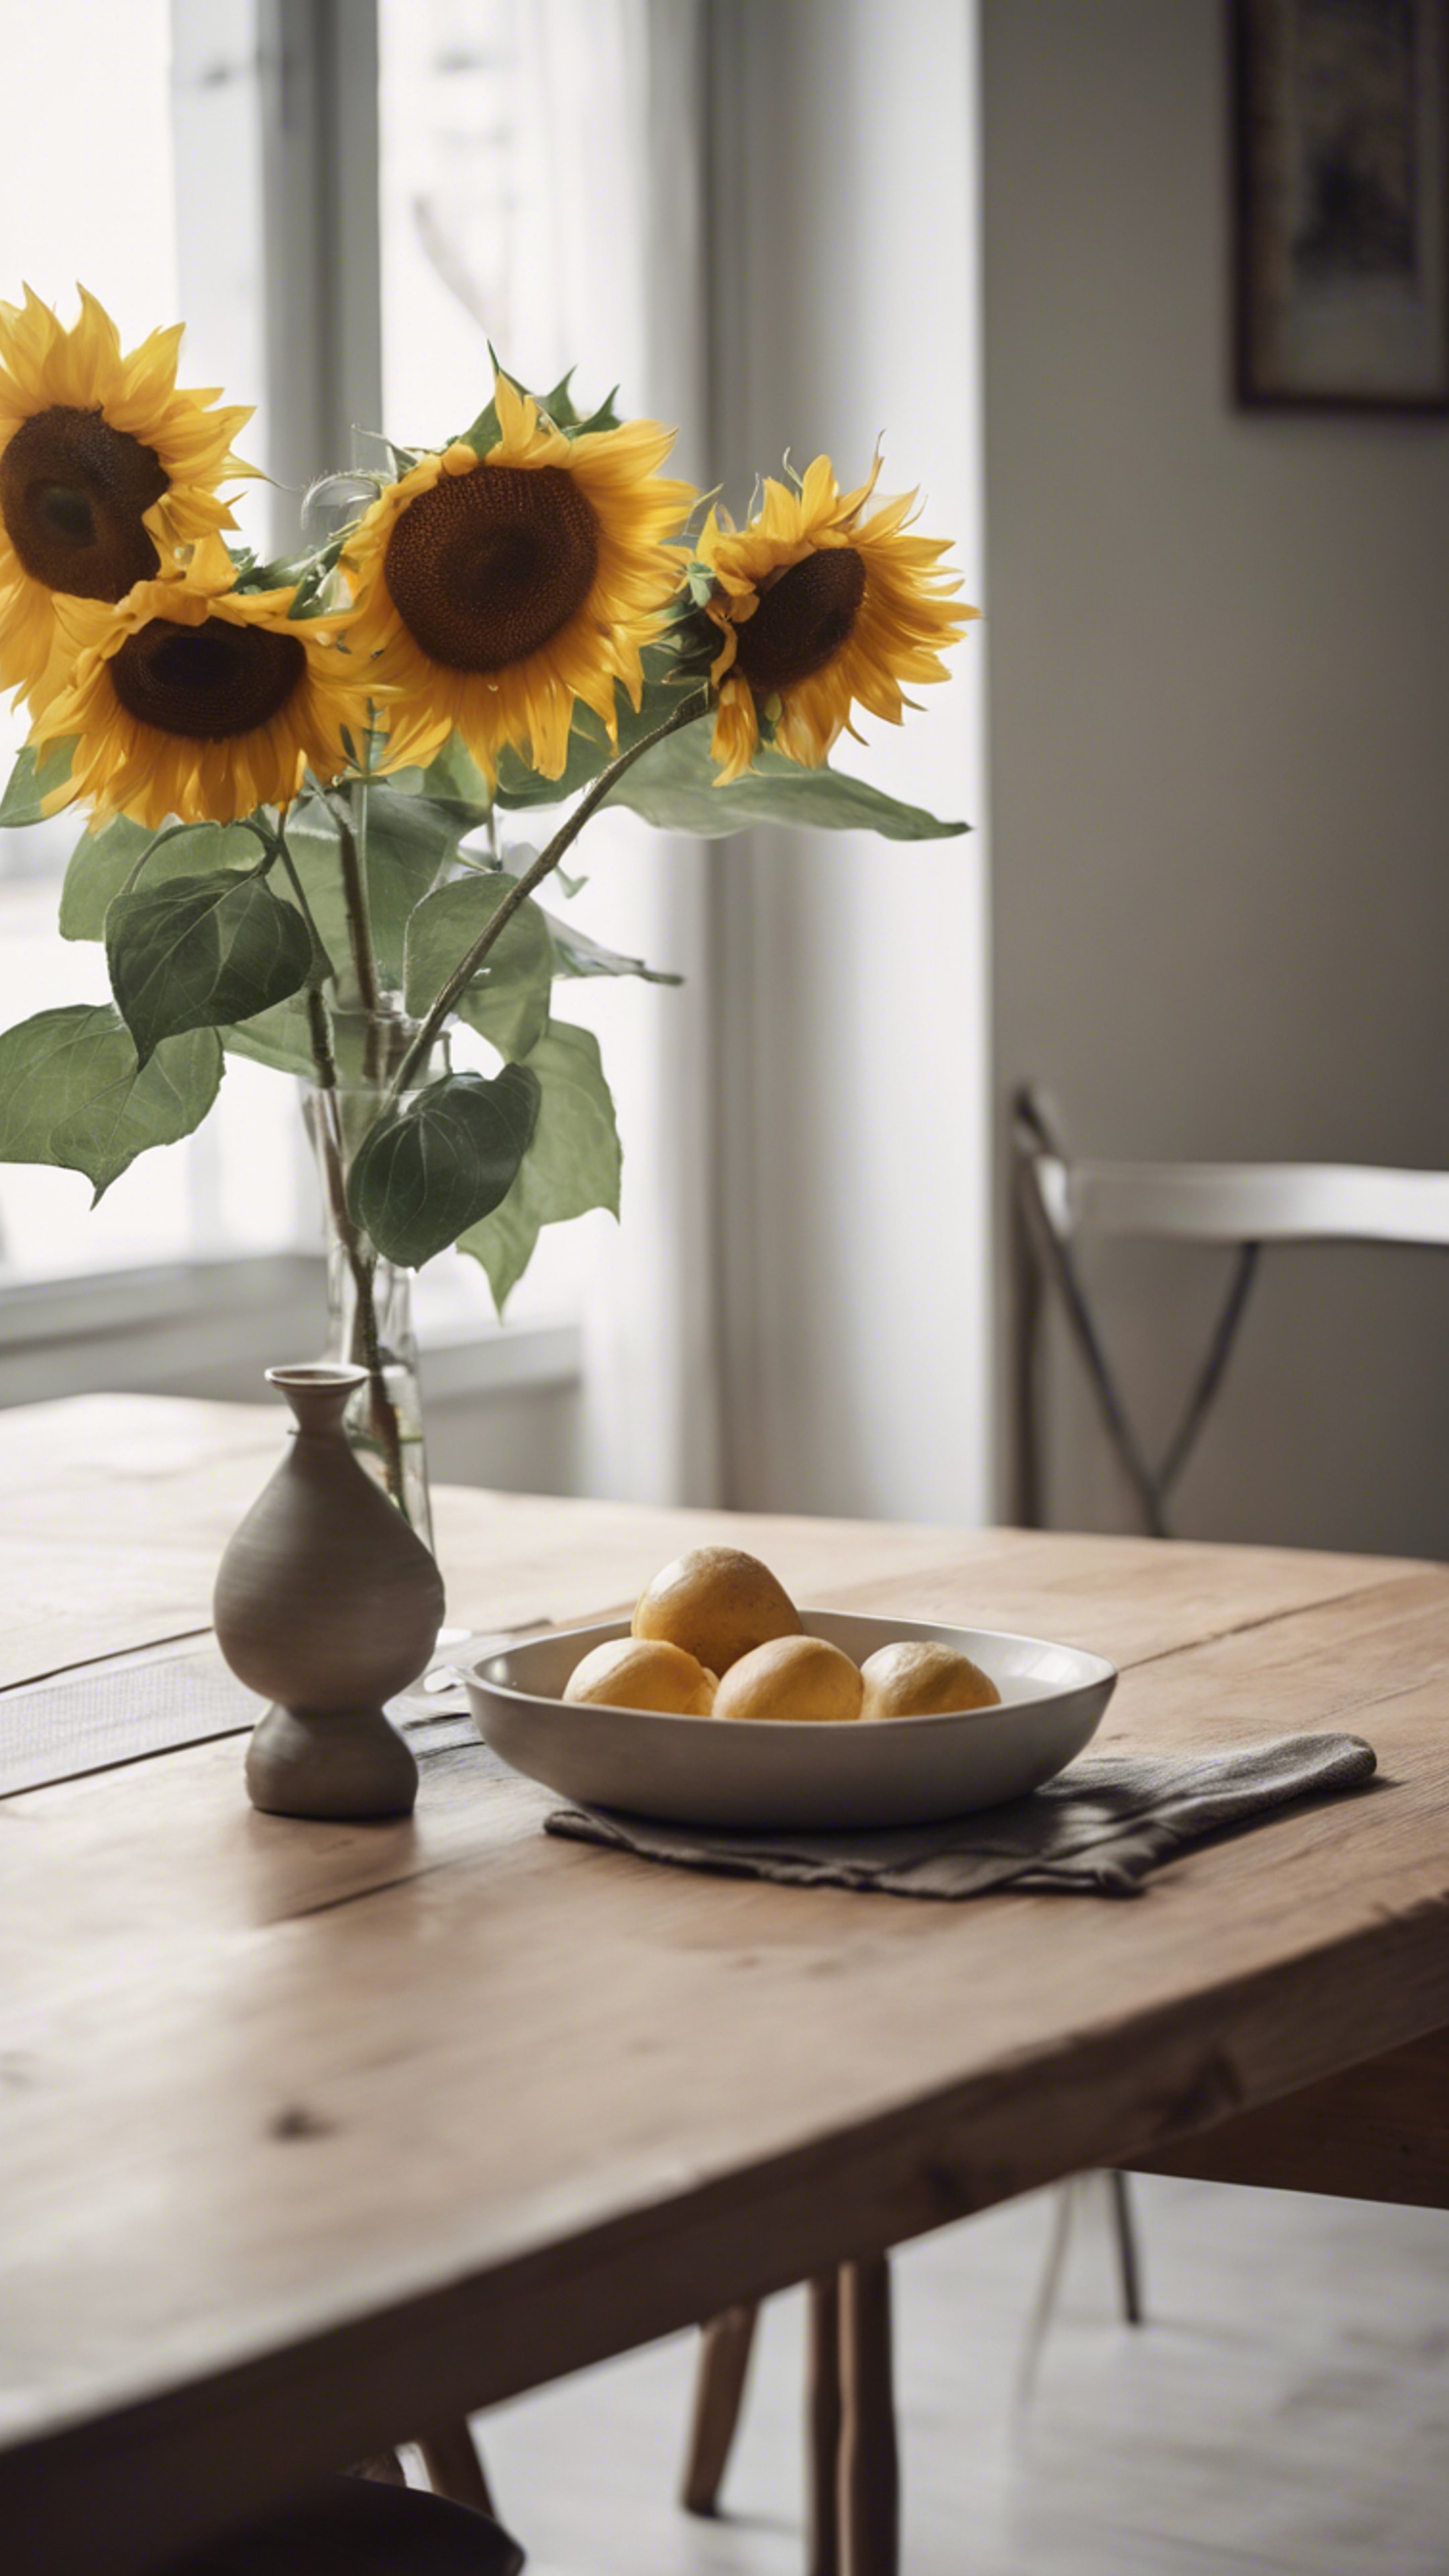 A minimalist dining area with a wooden table, set with simple china and a vase of sunflowers.壁紙[7db5290c1b5a4d25ba08]